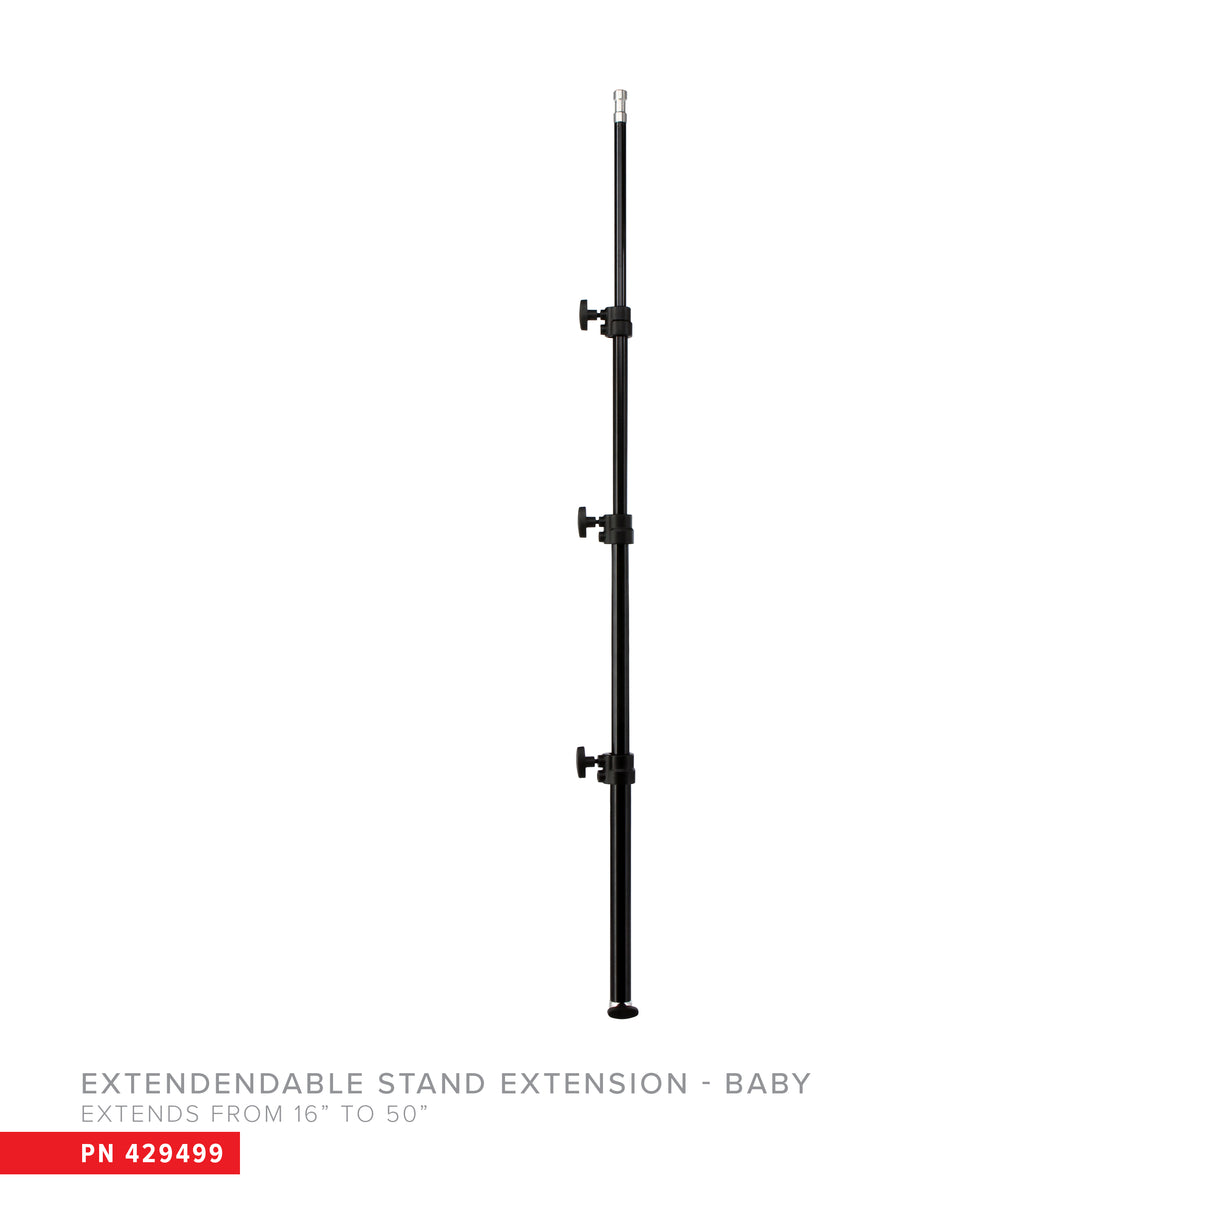 Baby Stand Extensions